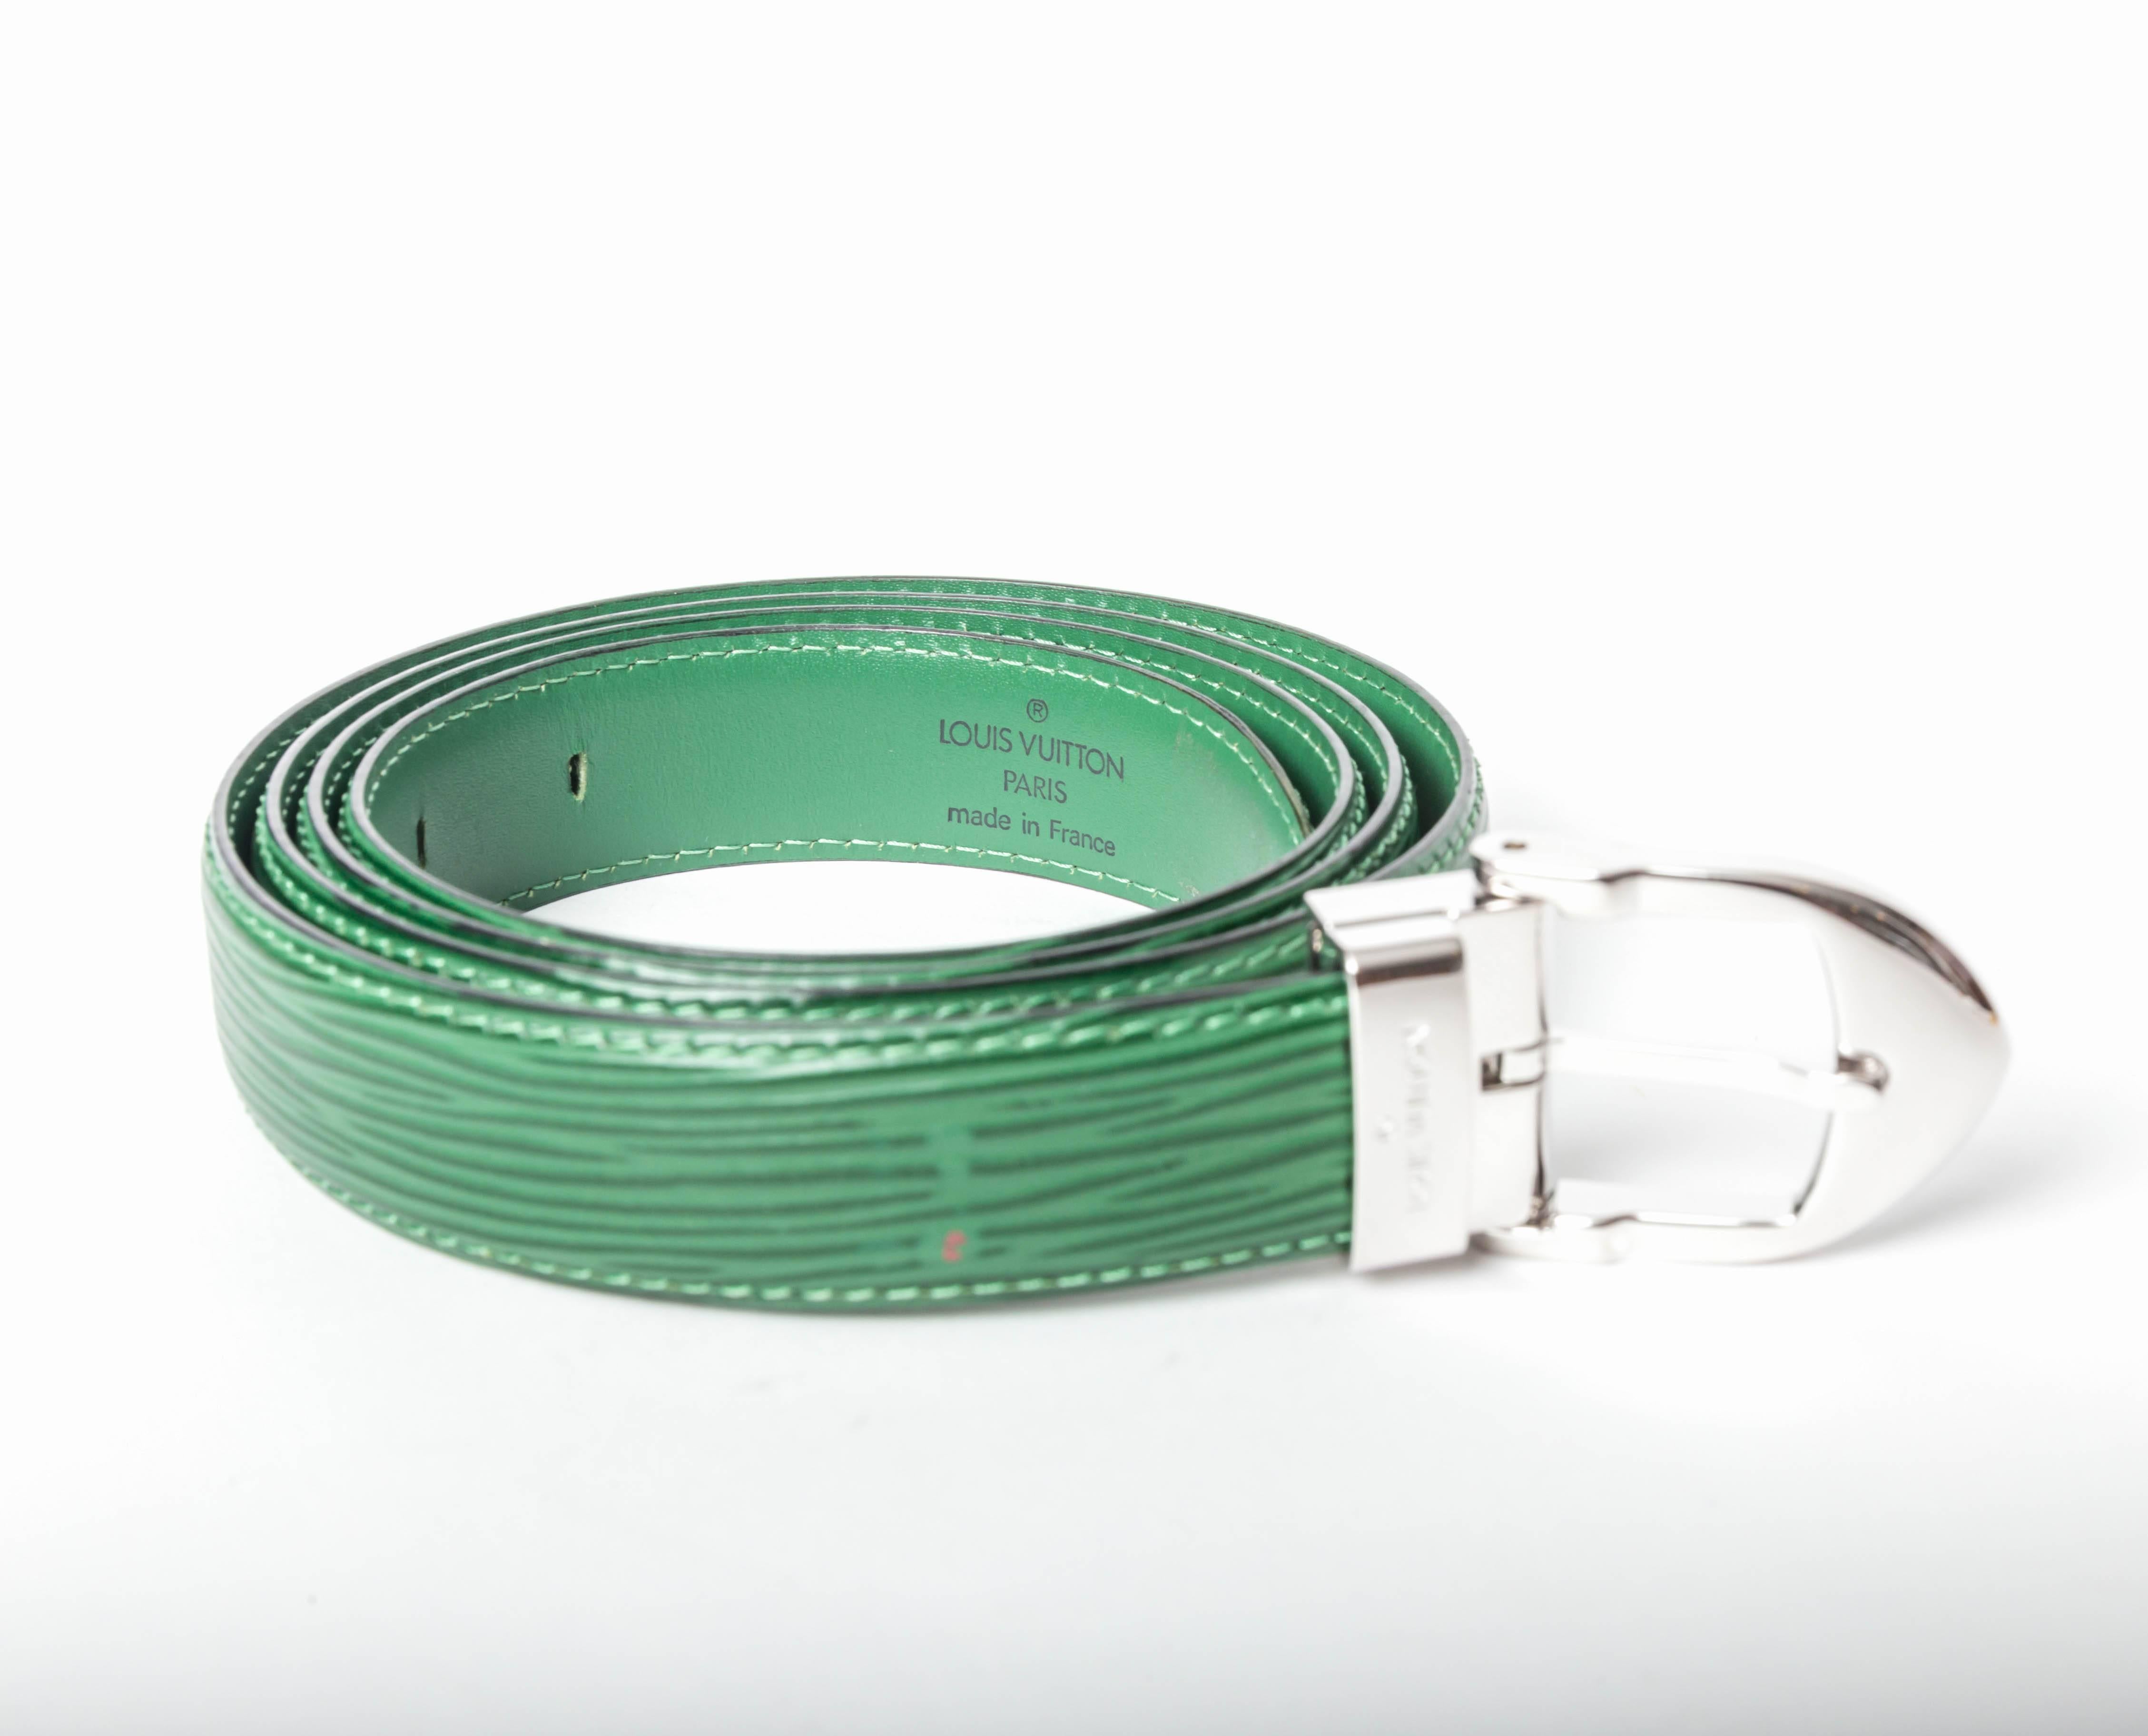 Louis Vuitton Green Epi Belt with Silver and Gold Buckles / New With Box - 44 3